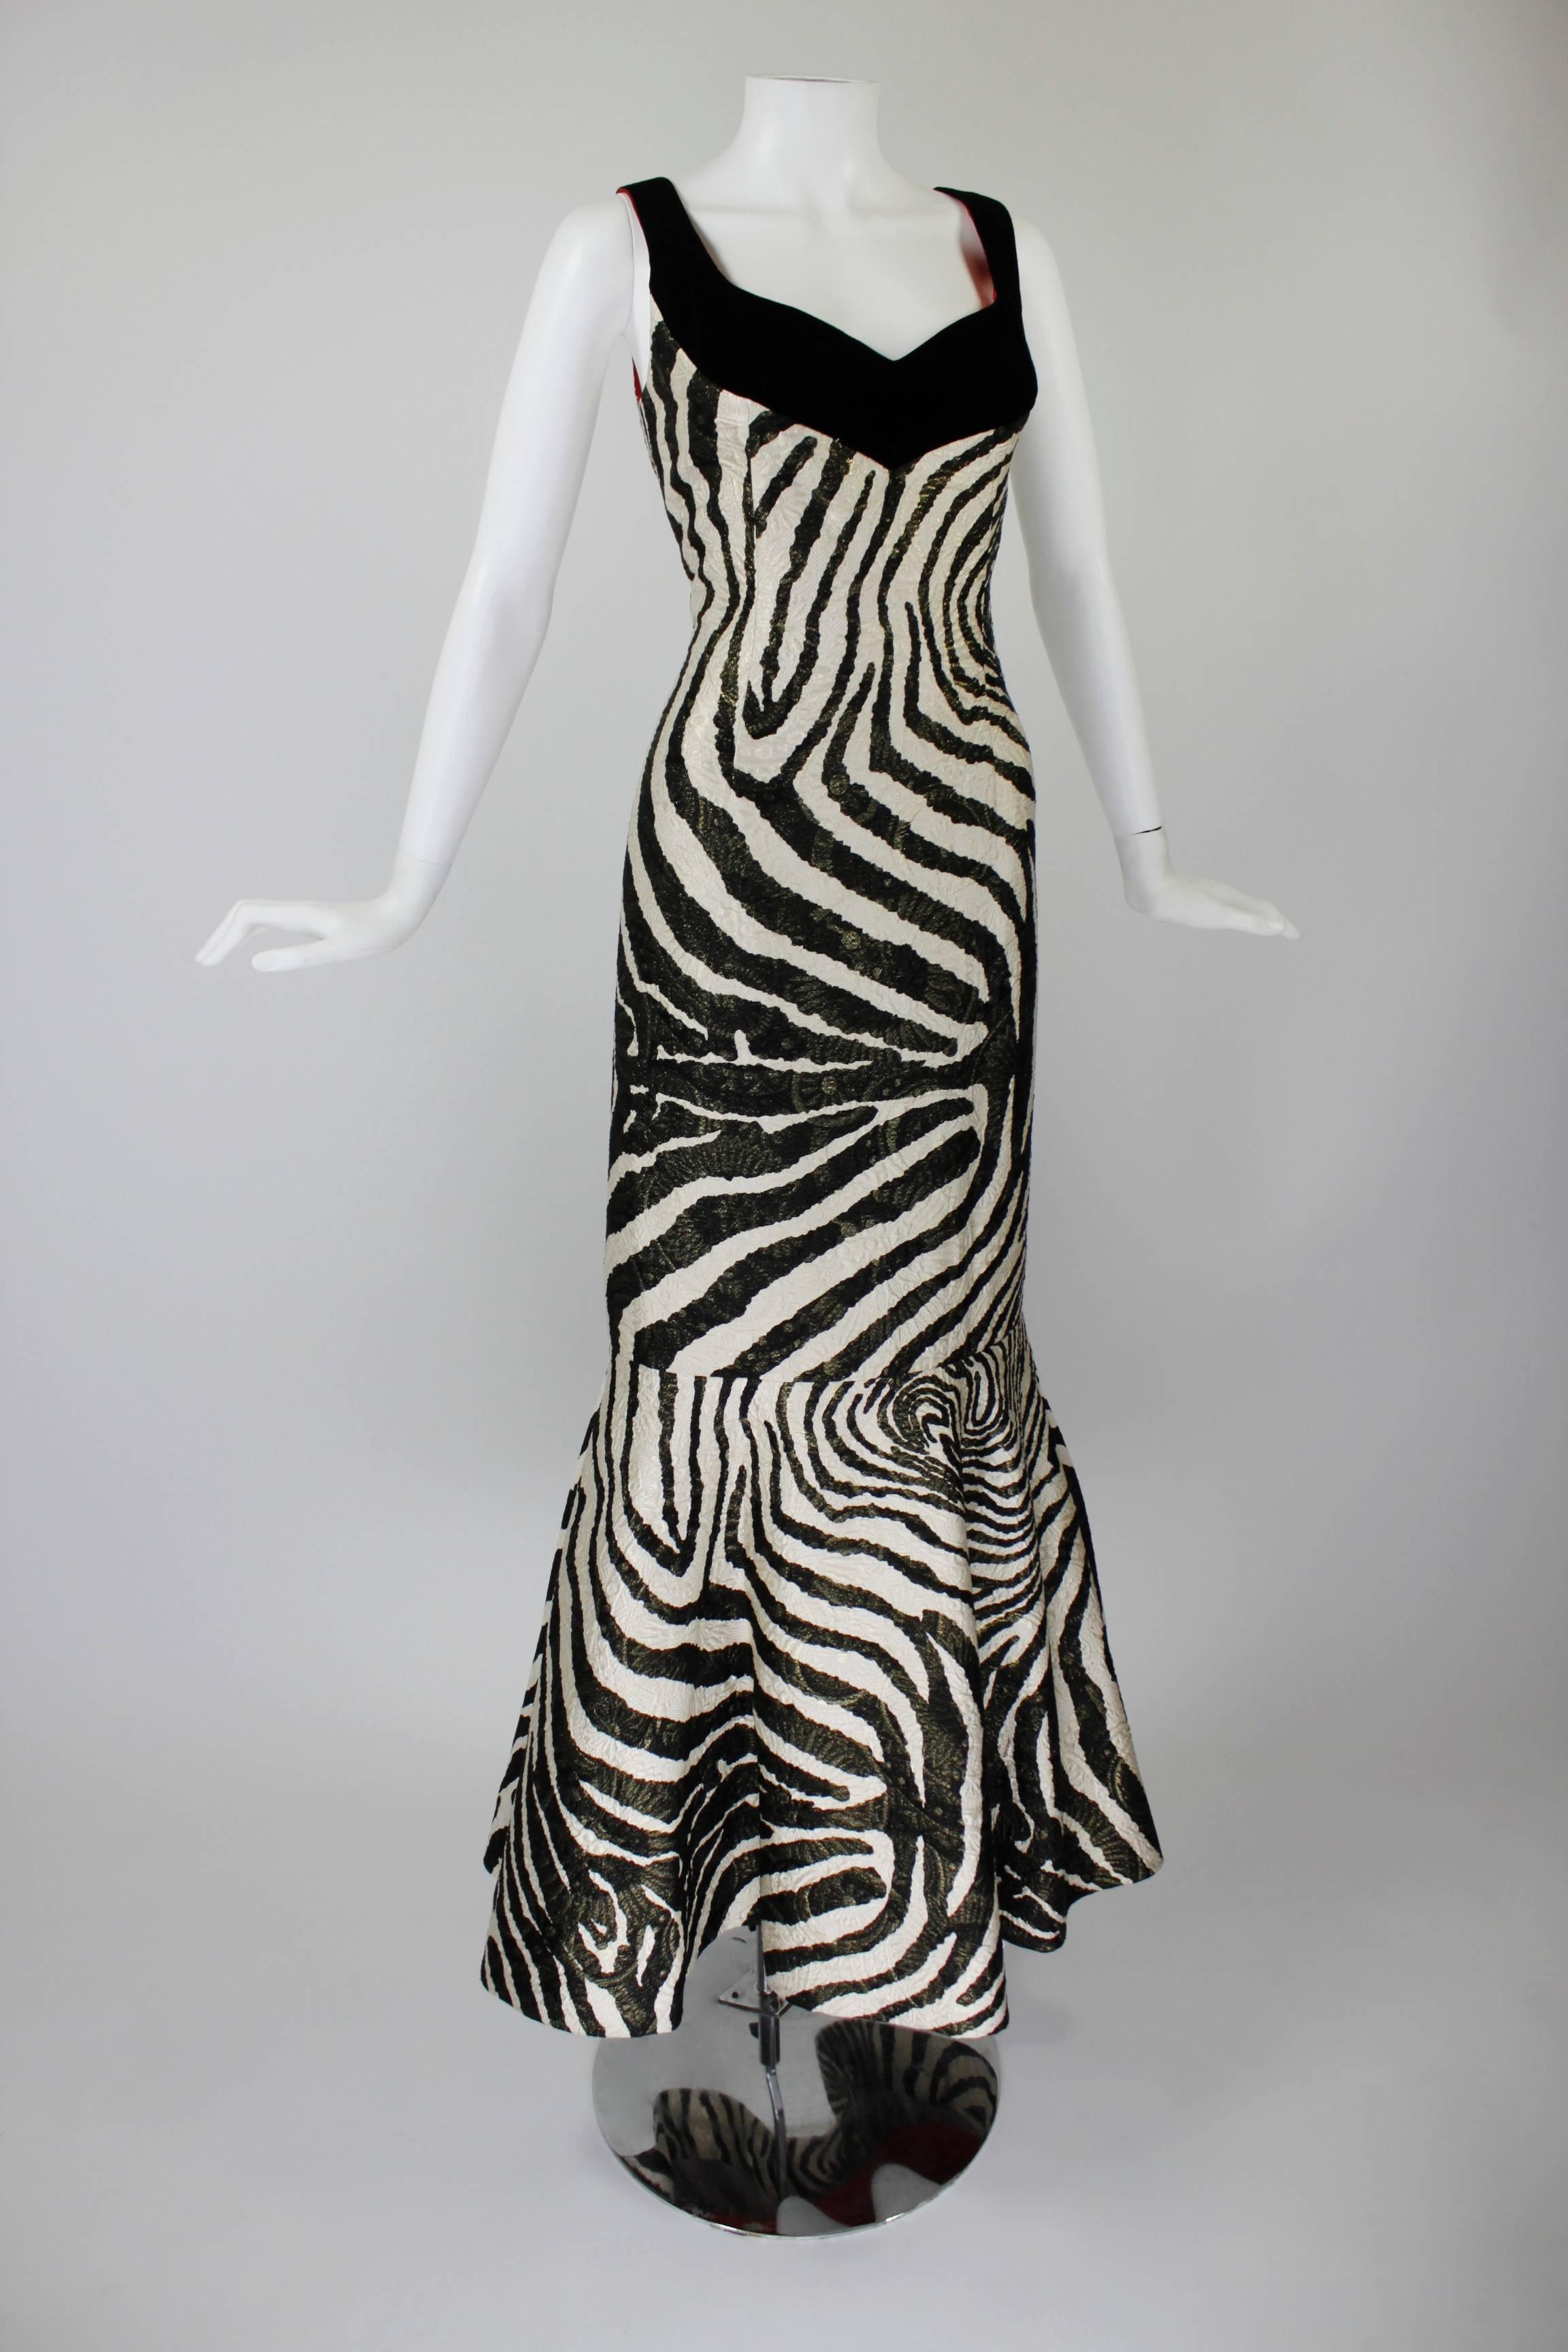 A fabulous, sexy evening gown from Arnold Scaasi. Done in a bold, metallic zebra print, the hourglass silhouette flares into a fishtail at the hem. A matching triangle-shaped, fringe-border wrap accompanies the gown.

-Fully lined
-Zips in